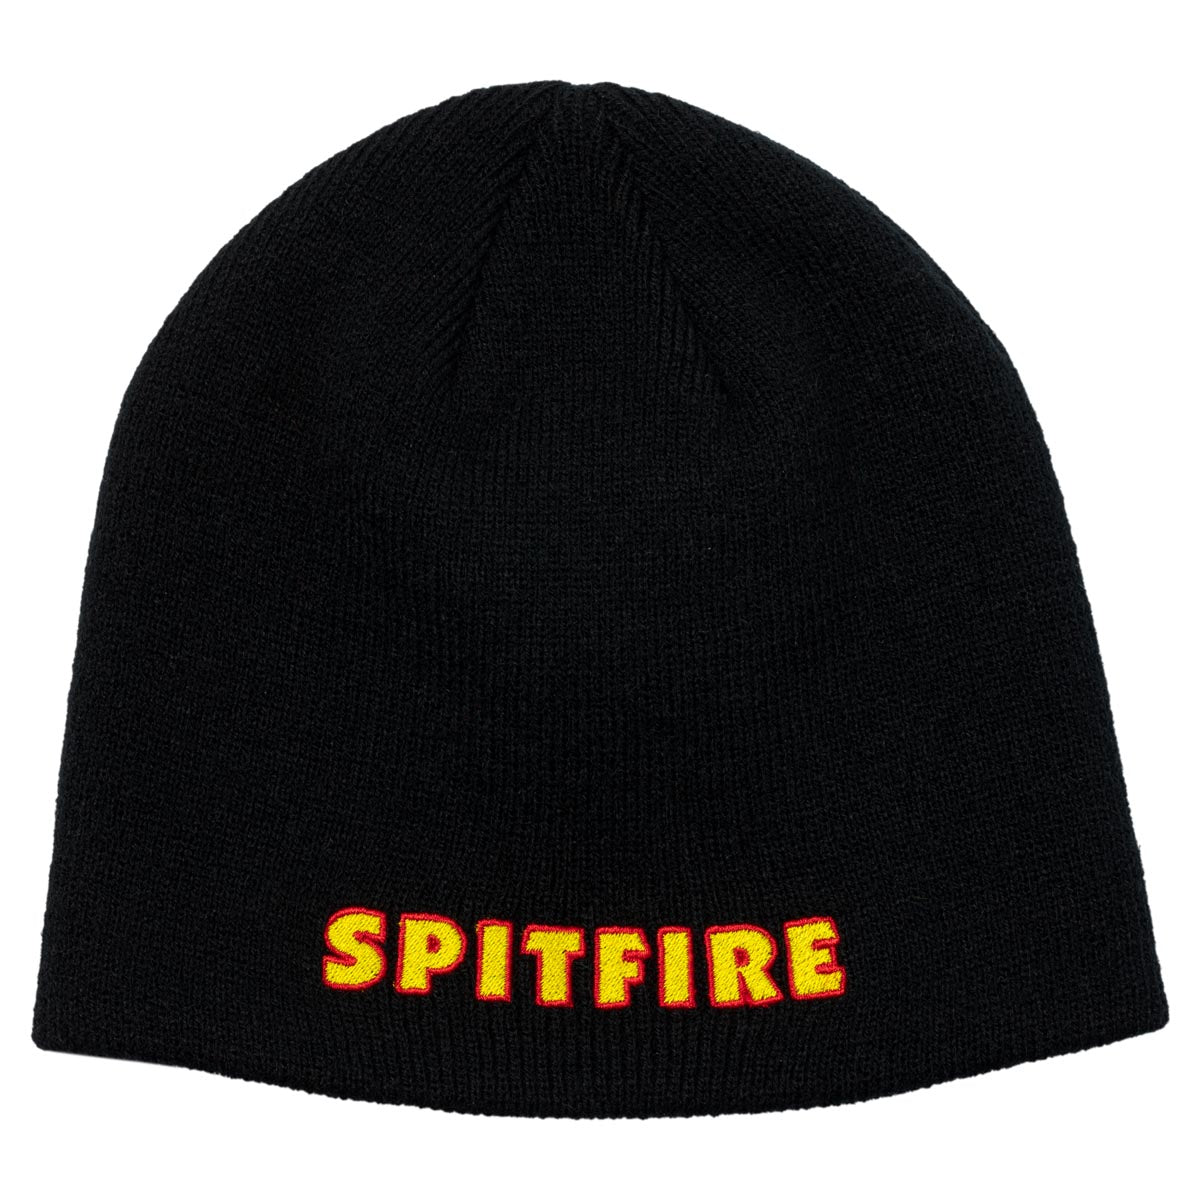 Spitfire Ltb Script Beanie - Black/Gold/Red image 1